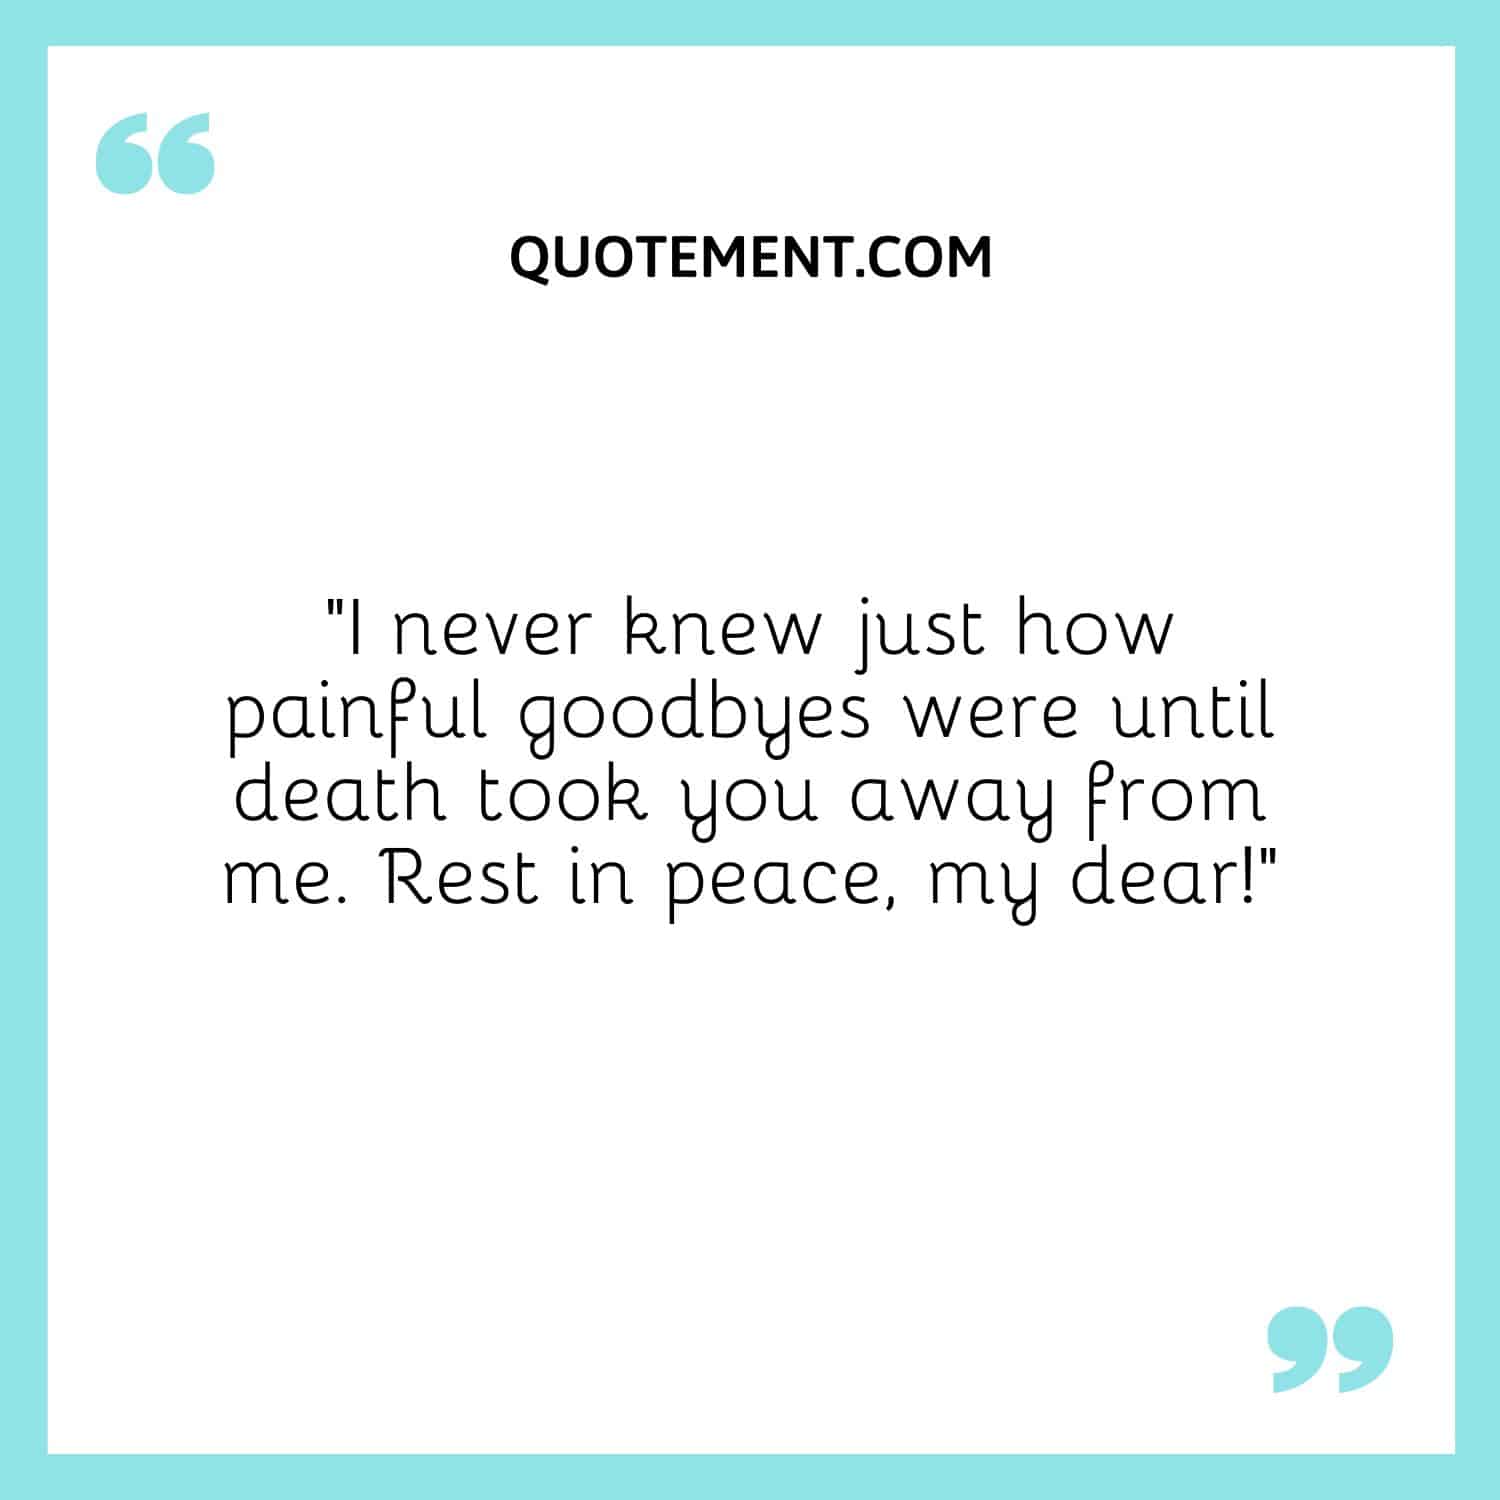 I never knew just how painful goodbyes were until death took you away from me